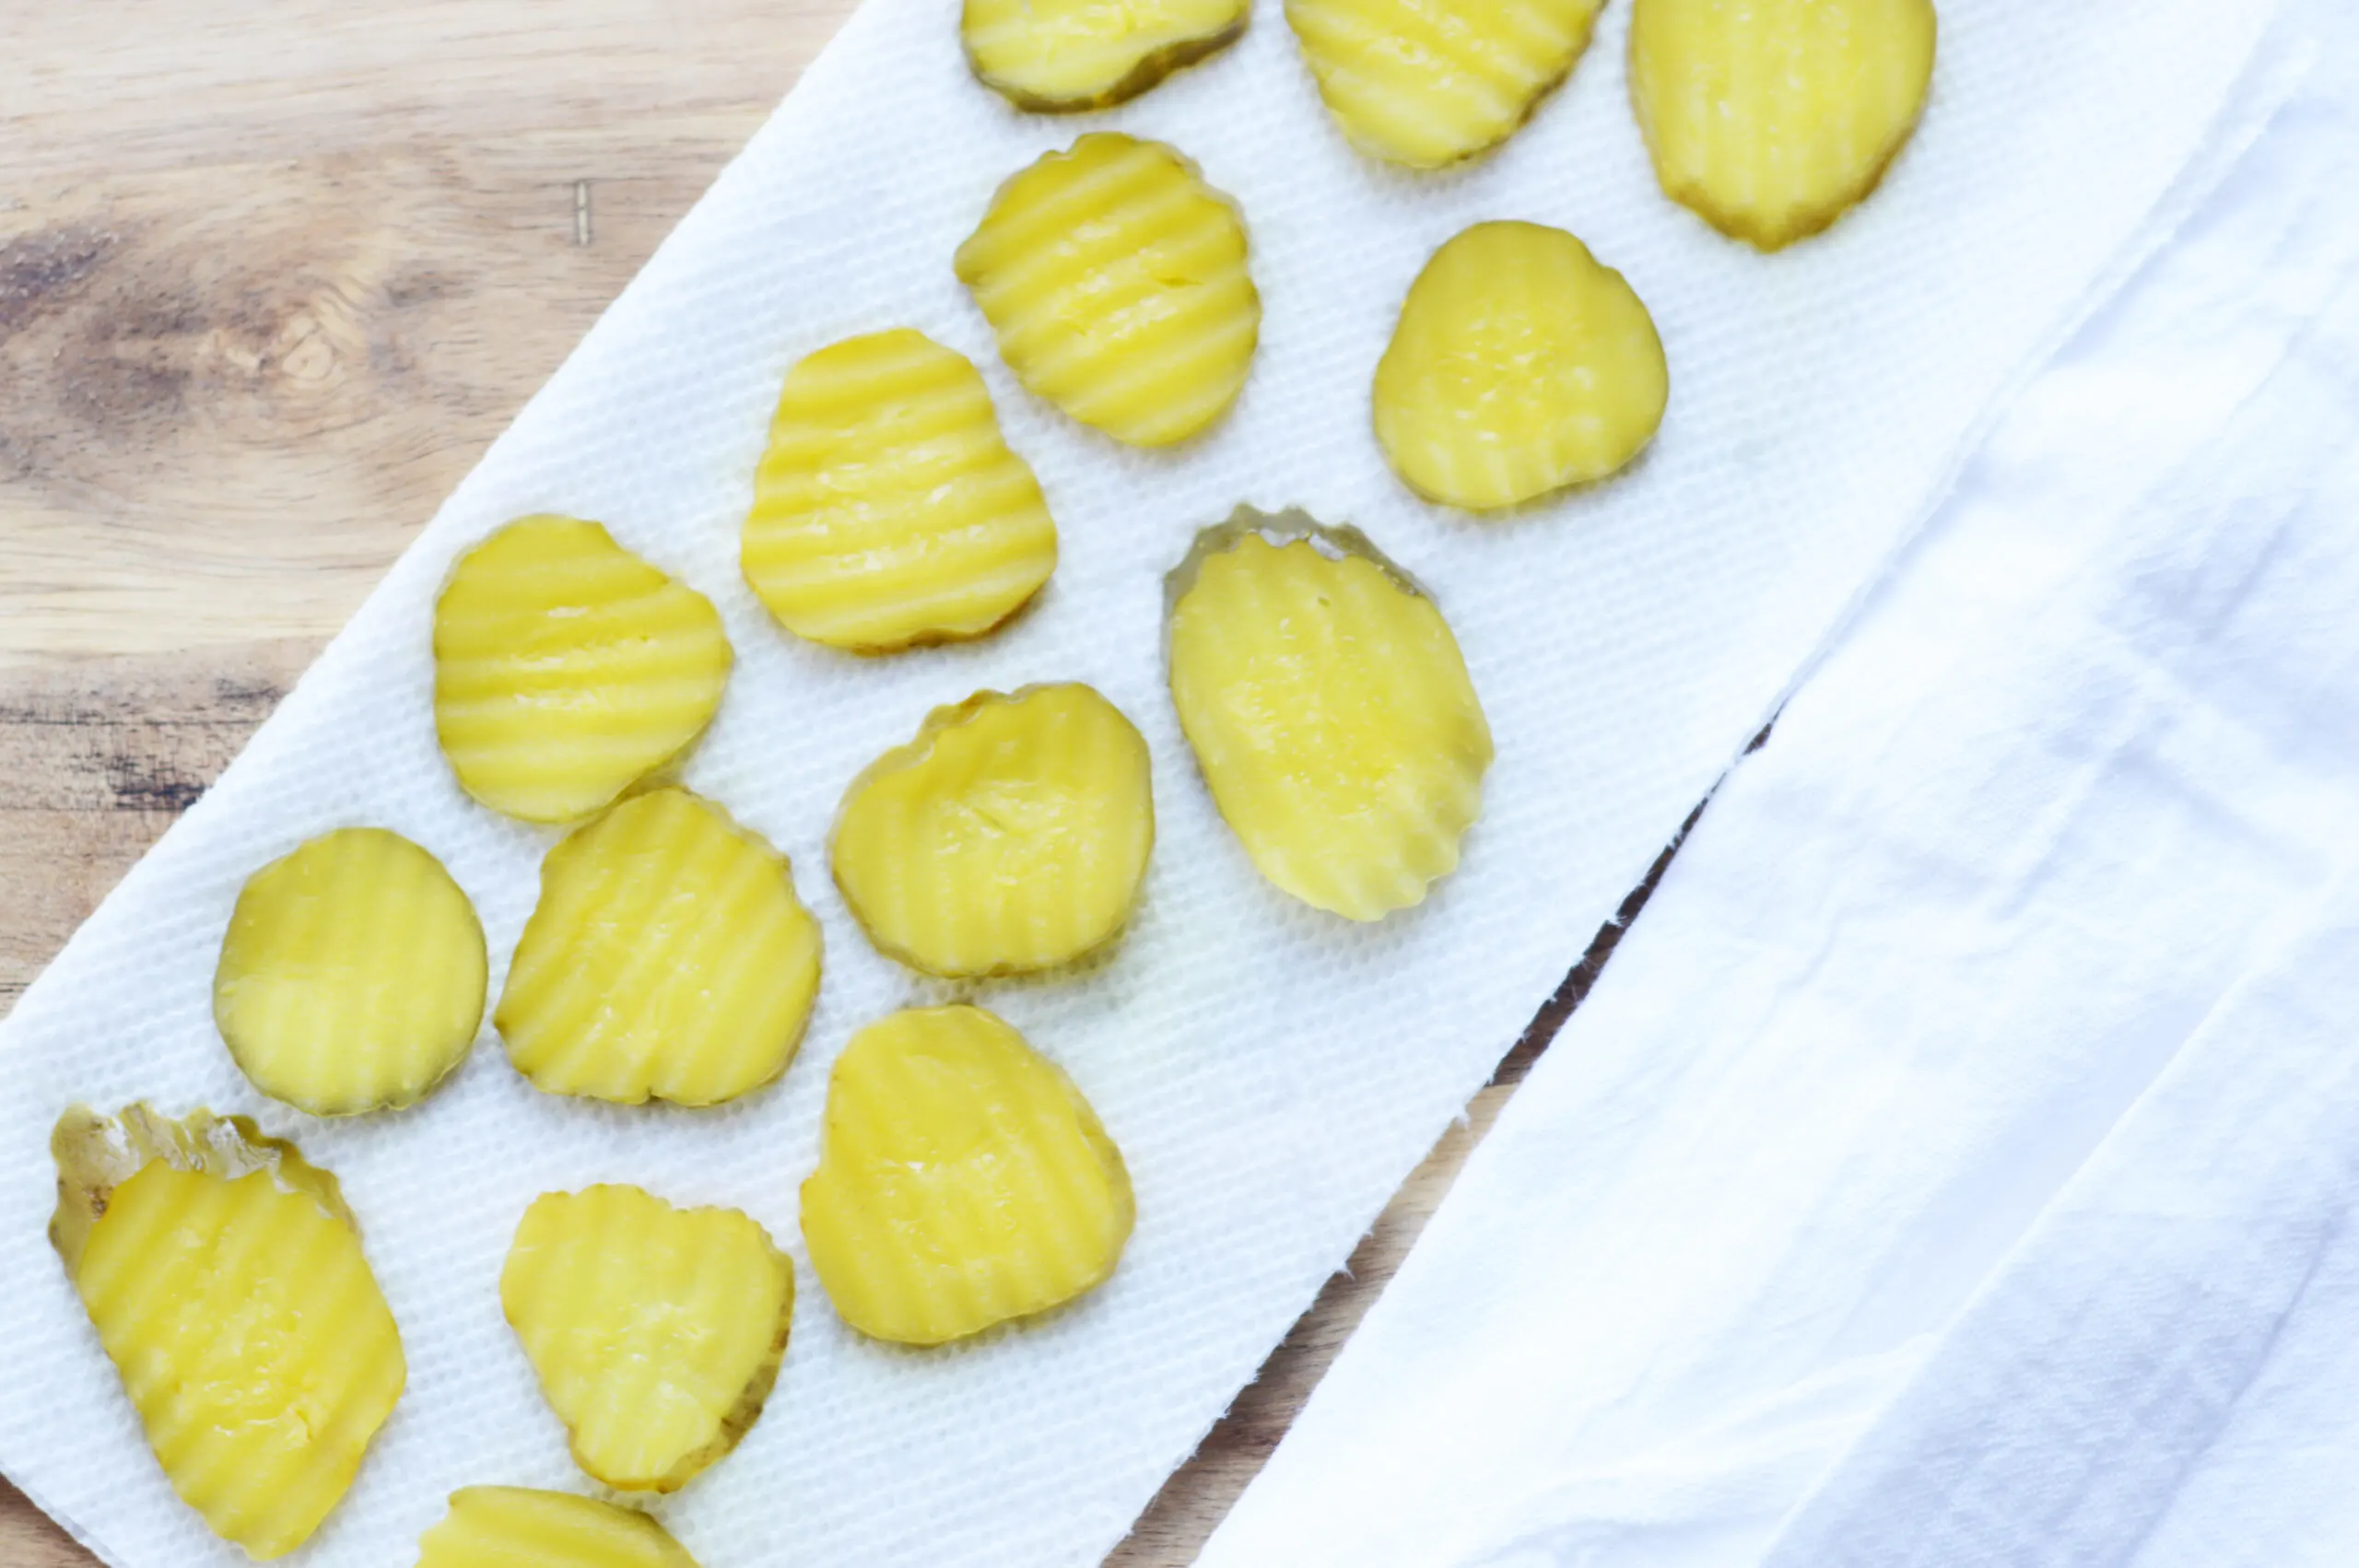 Air fryer recipes are my new favorite way to cut calories and lighten up delicious recipes. These air fryer pickles are a healthy fried pickle recipe that is even acceptable on Weight Watchers! 